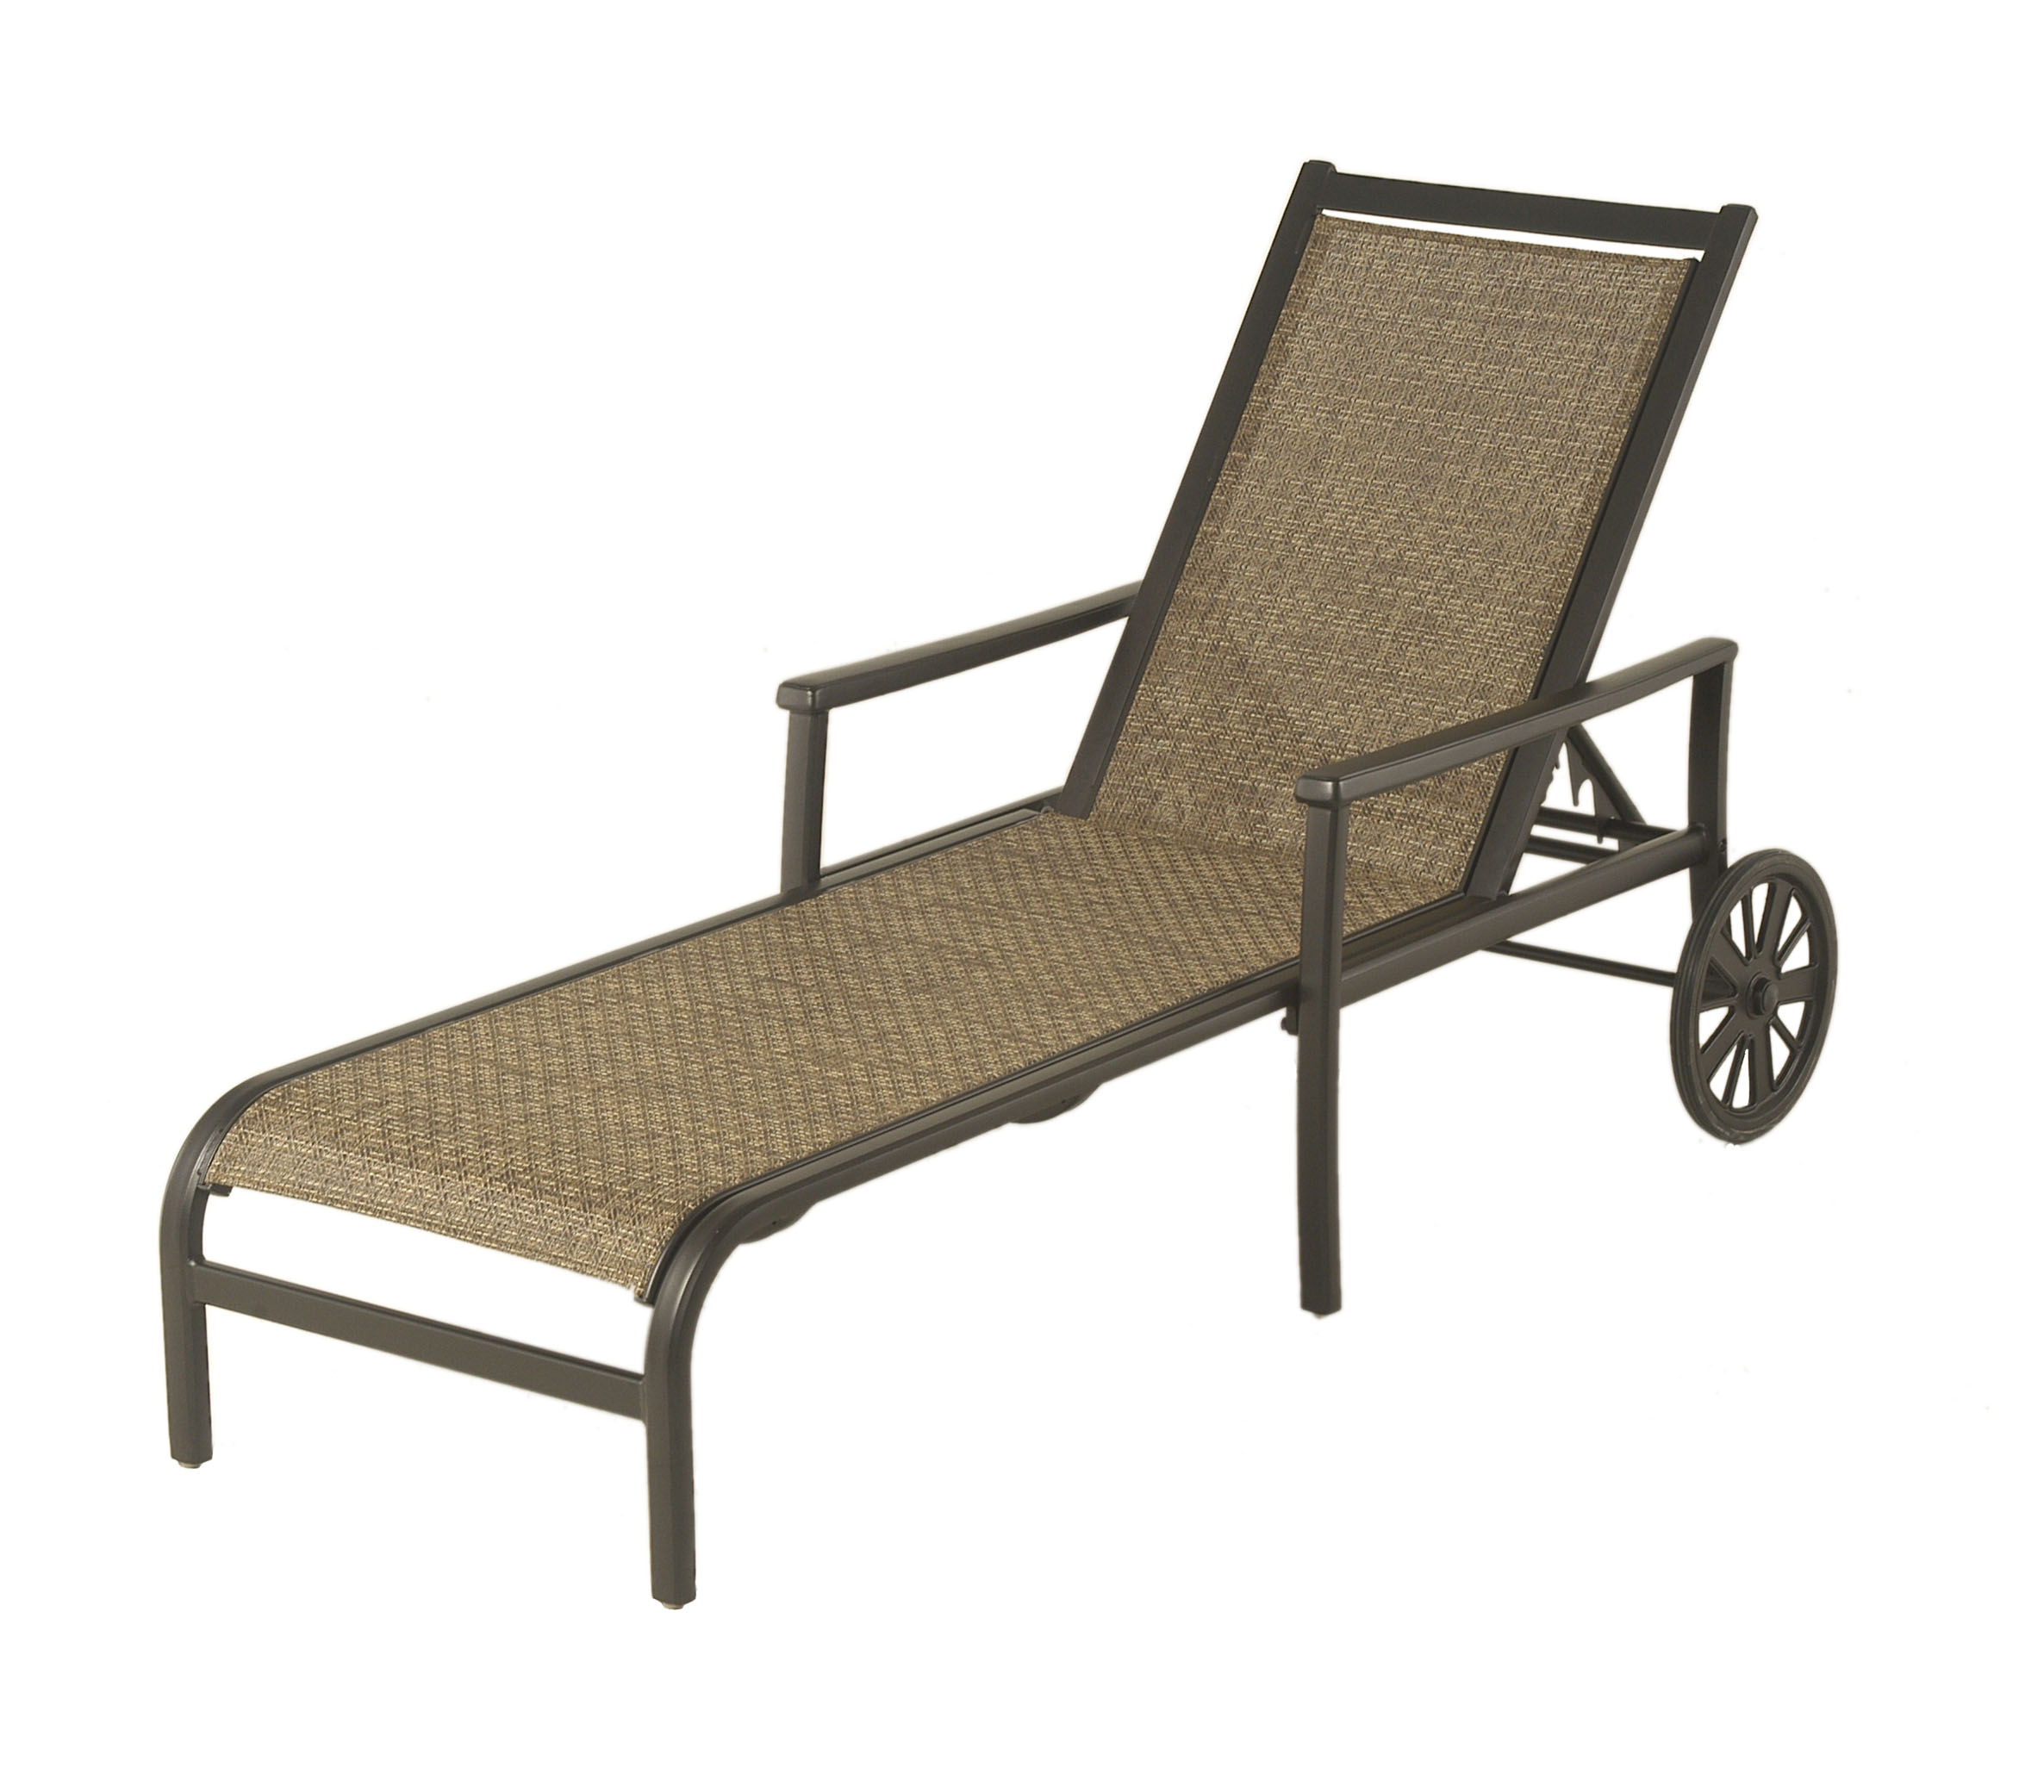 Stratford Sling Chaise Lounge		